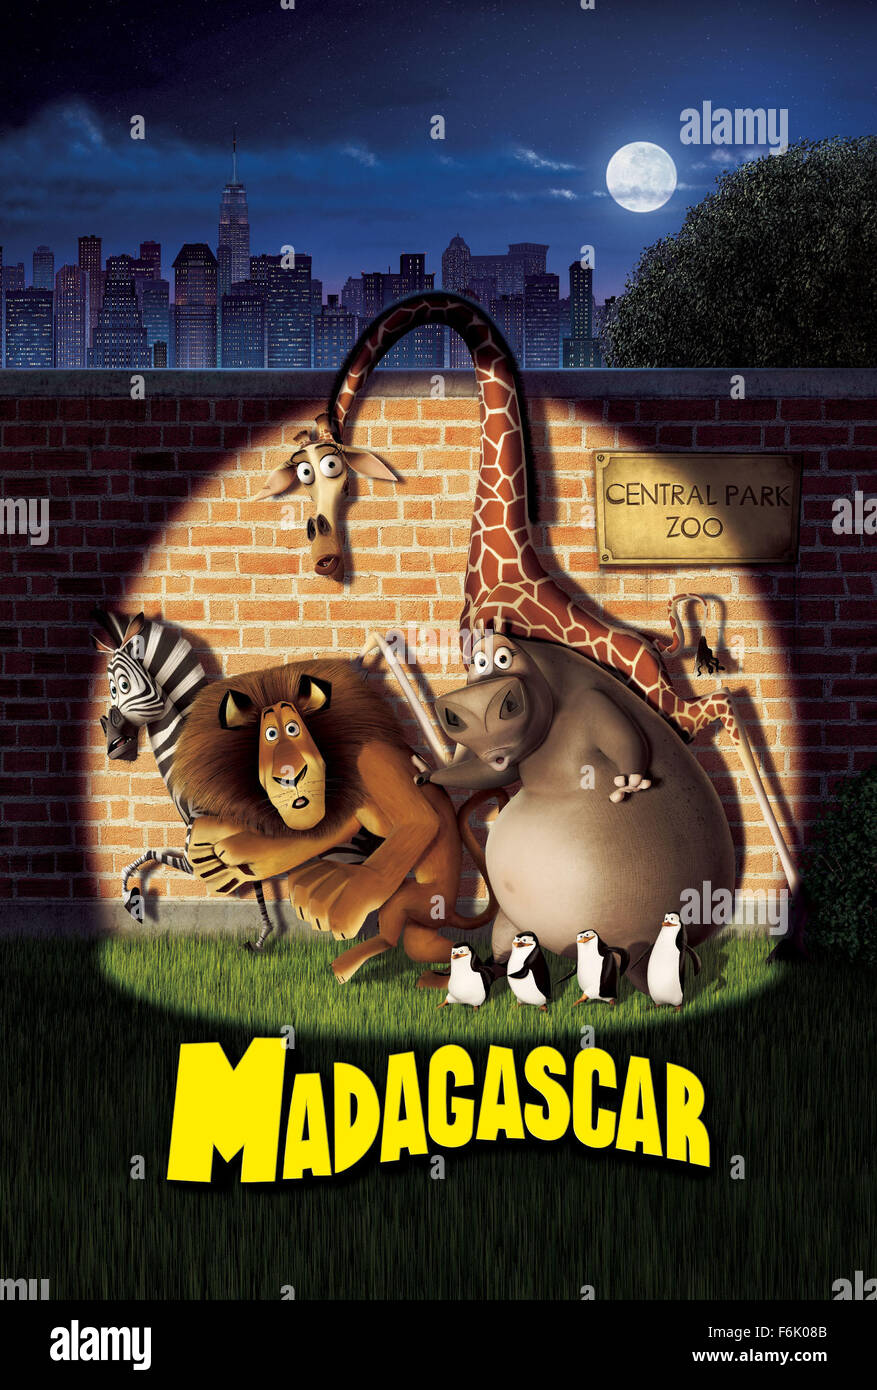 RELEASE DATE: May 27, 2005. MOVIE TITLE: Madagascar. STUDIO: DreamWorks SKG. PLOT: At New York's Central Park Zoo, a lion, a zebra, a giraffe, and a hippo are best friends and stars of the show. But when one of the animals goes missing from their cage, the other three break free to look for him, only to find themselves reunited ... on a ship en route to Africa. When their vessel is hijacked, however, the friends, who have all been raised in captivity, learn first-hand what life can be like in the wild. PICTURED: . Stock Photo